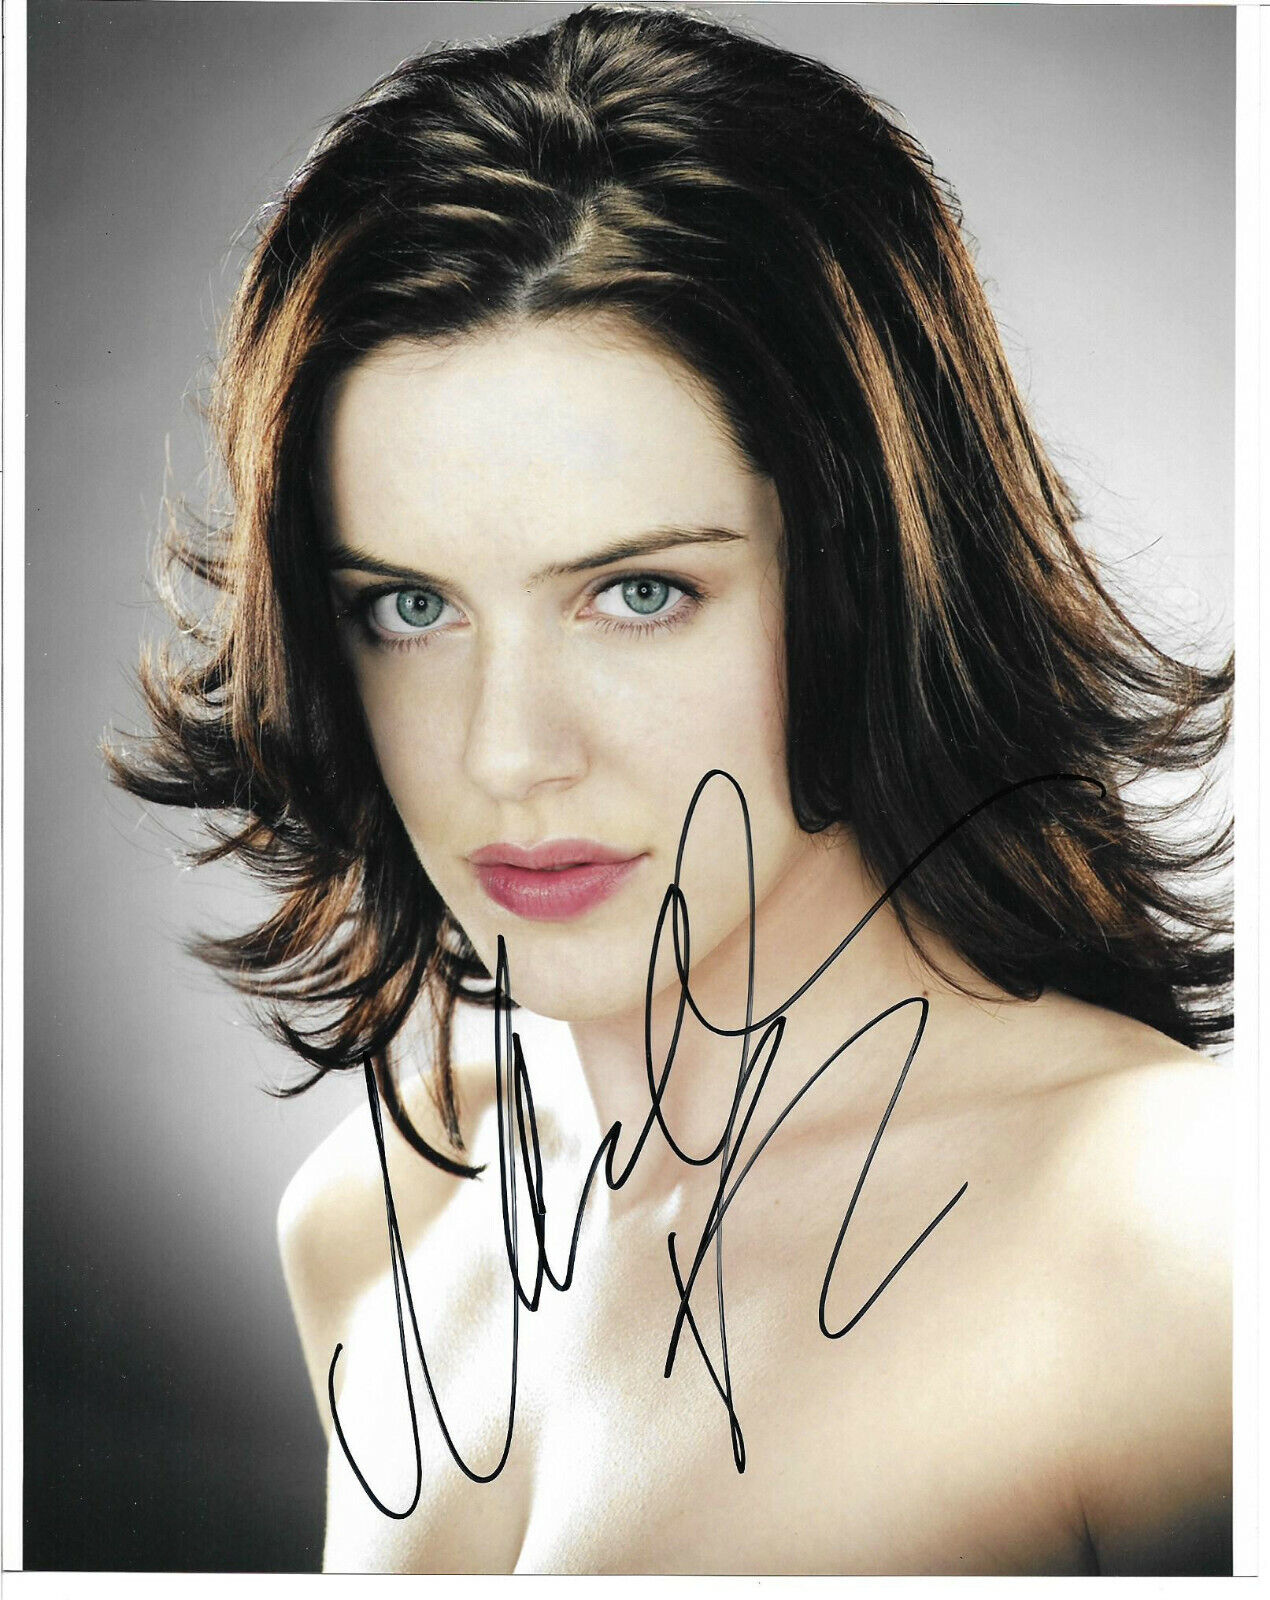 Michelle Ryan Authentic Signed 8x10 Photo Poster painting Autographed, Bionic Woman